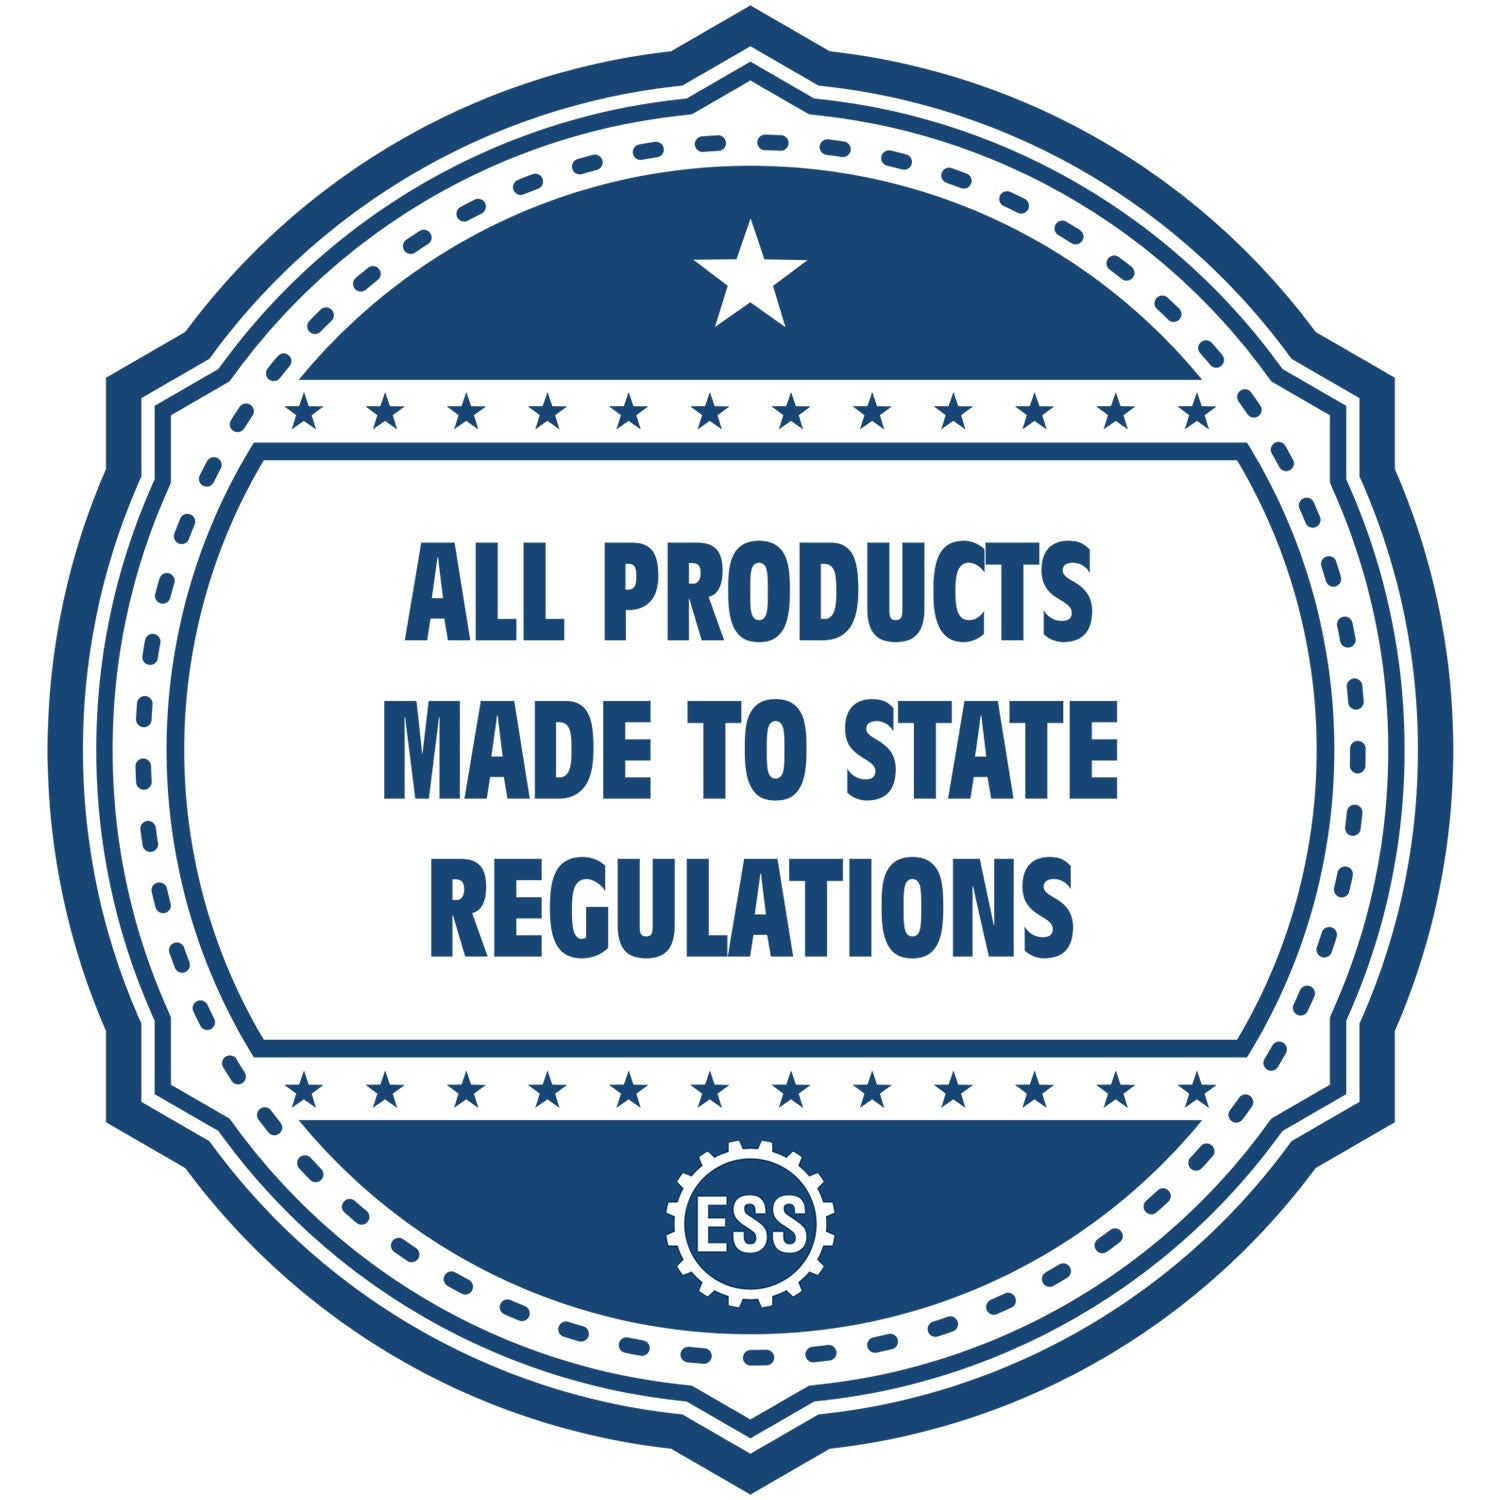 An icon or badge element for the Self-Inking Delaware Landscape Architect Stamp showing that this product is made in compliance with state regulations.